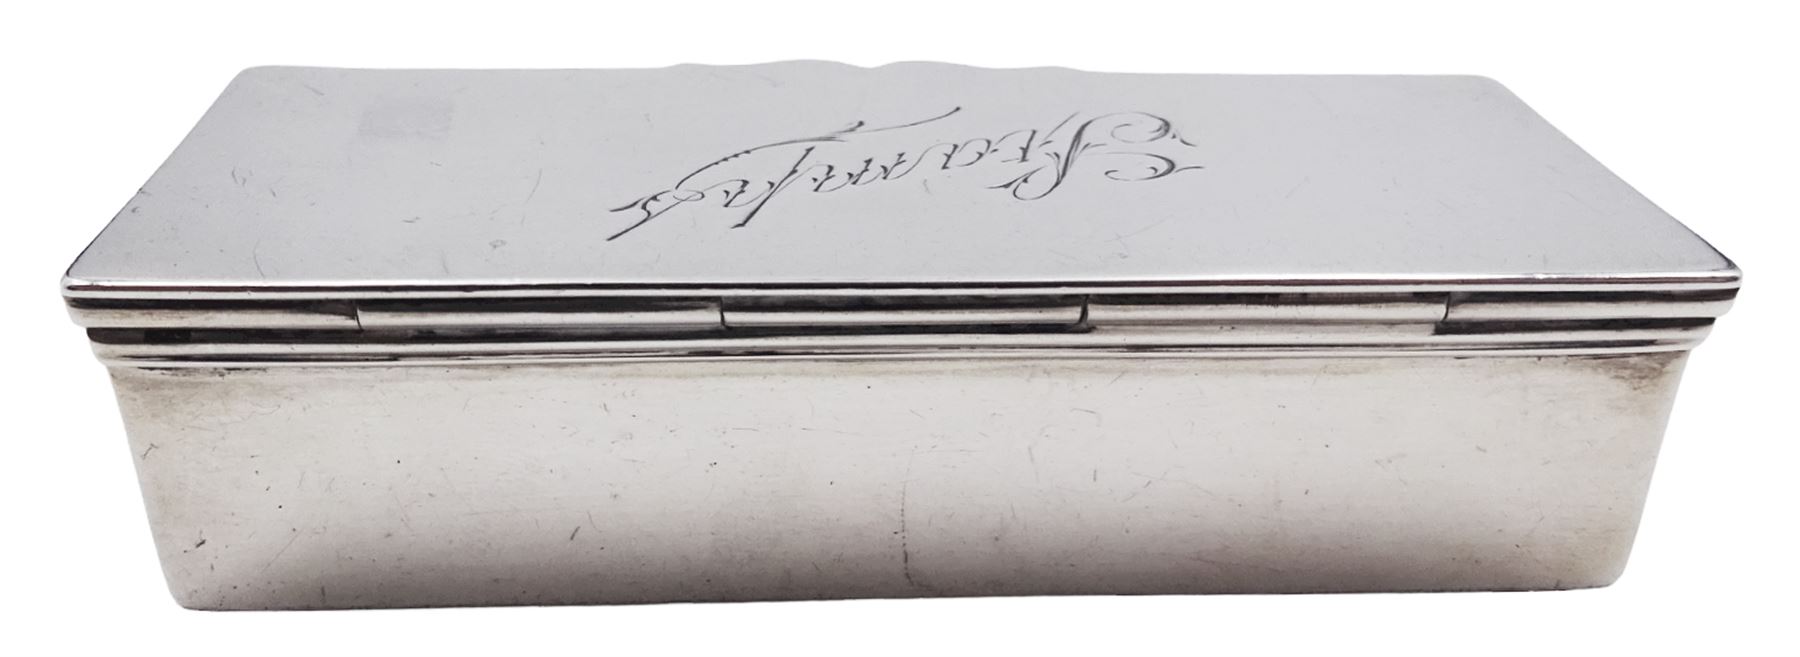 Late Victorian silver stamp box - Image 6 of 8